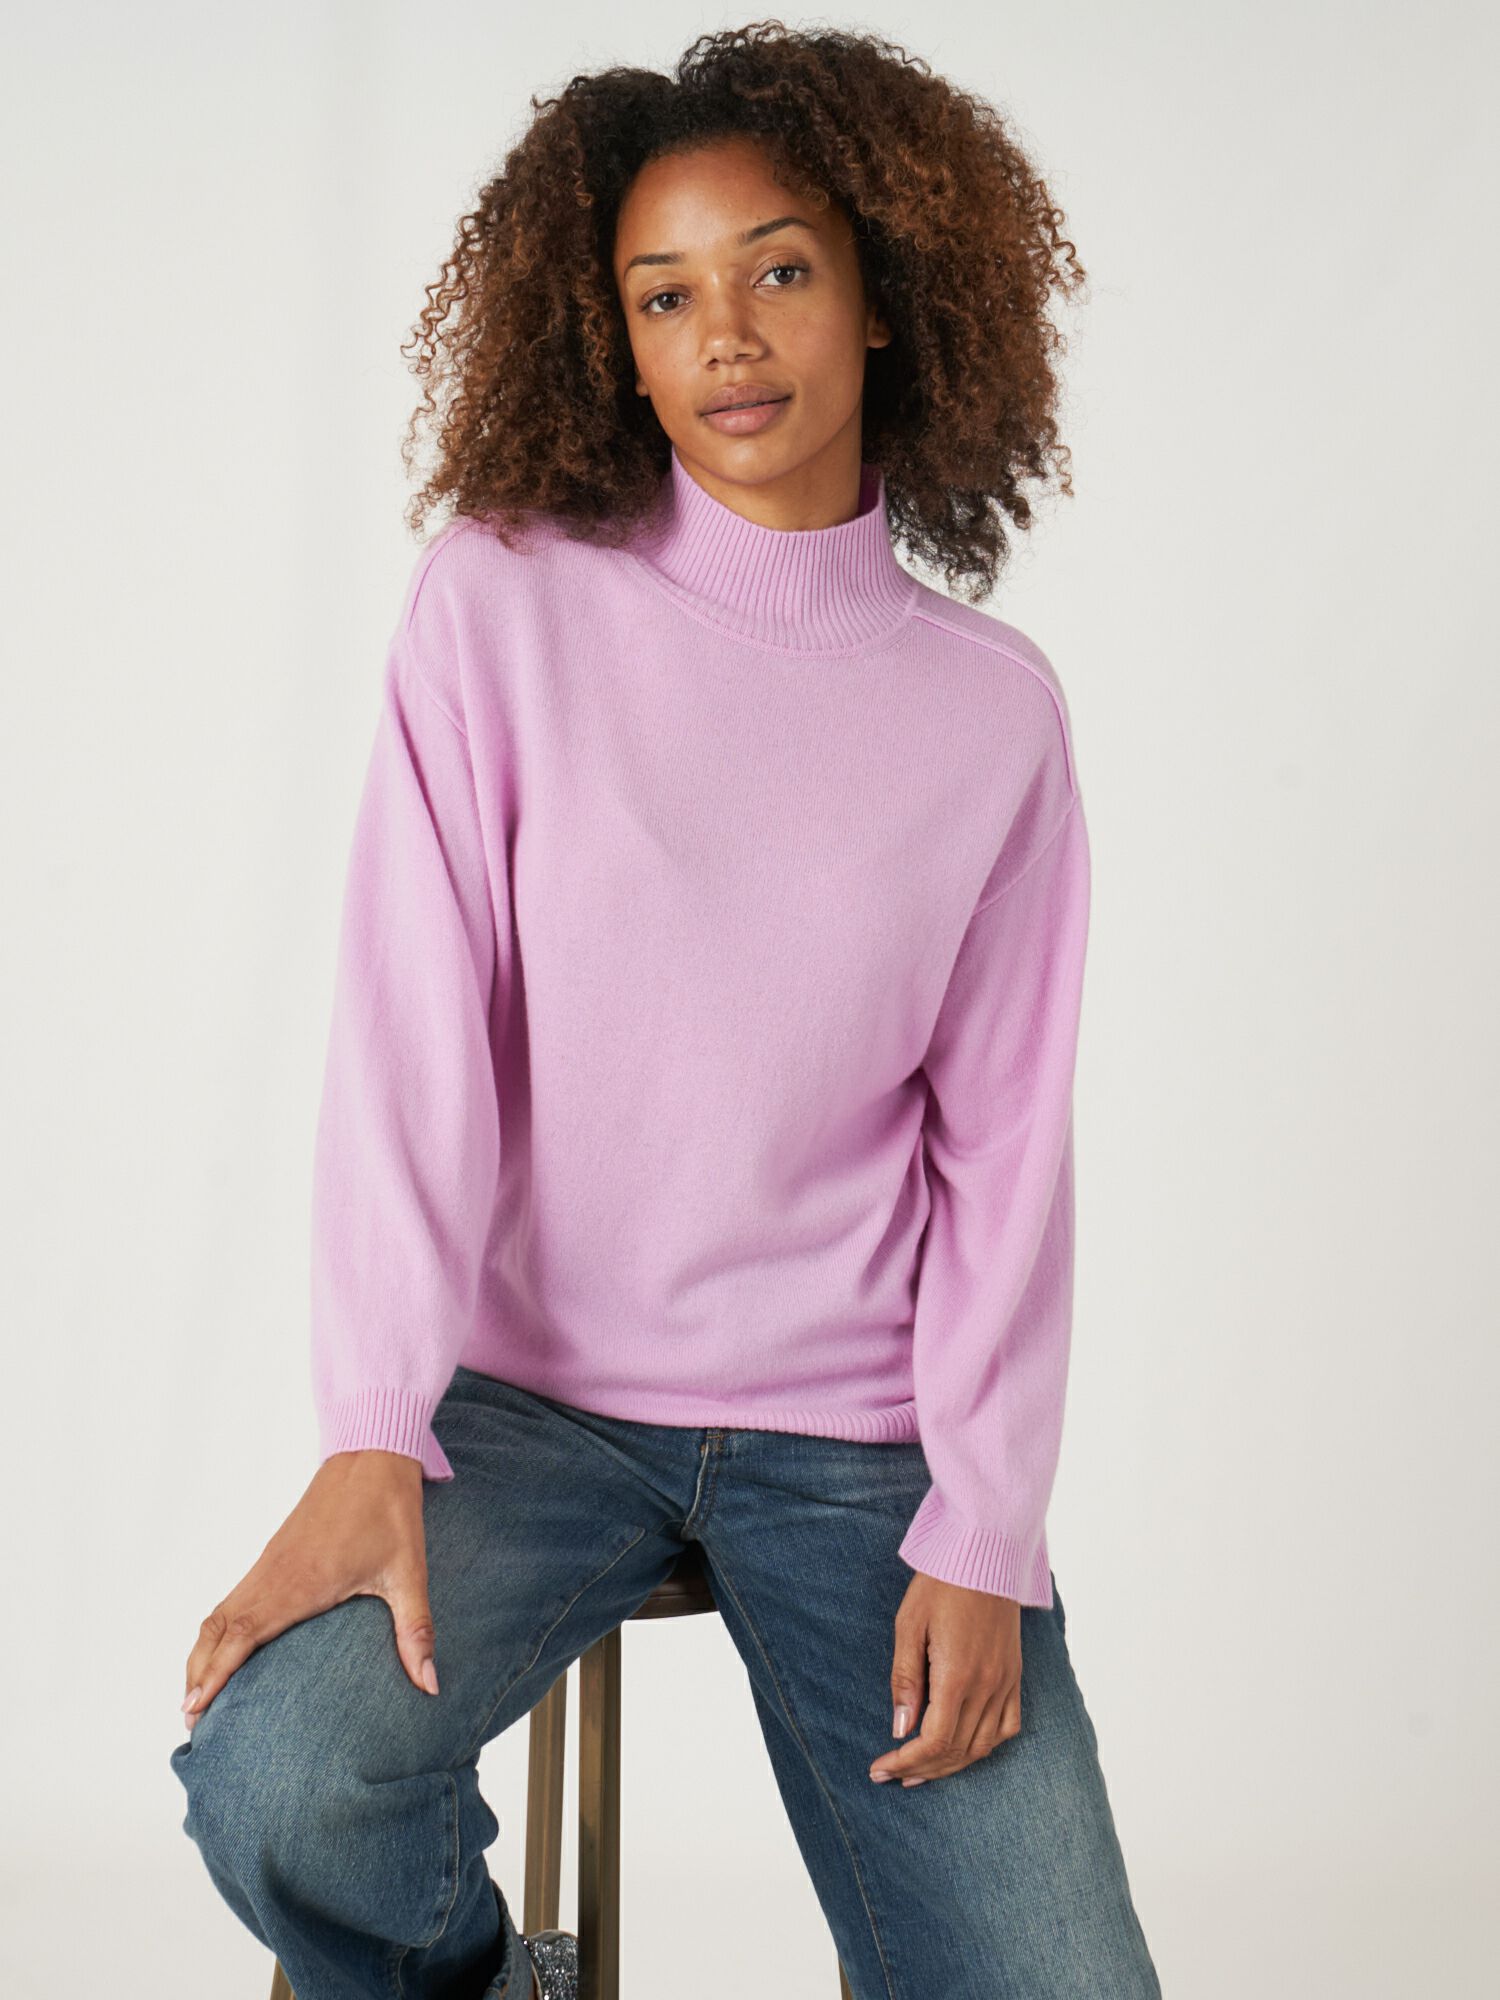 Loose fit organic cashmere with slit stand collar